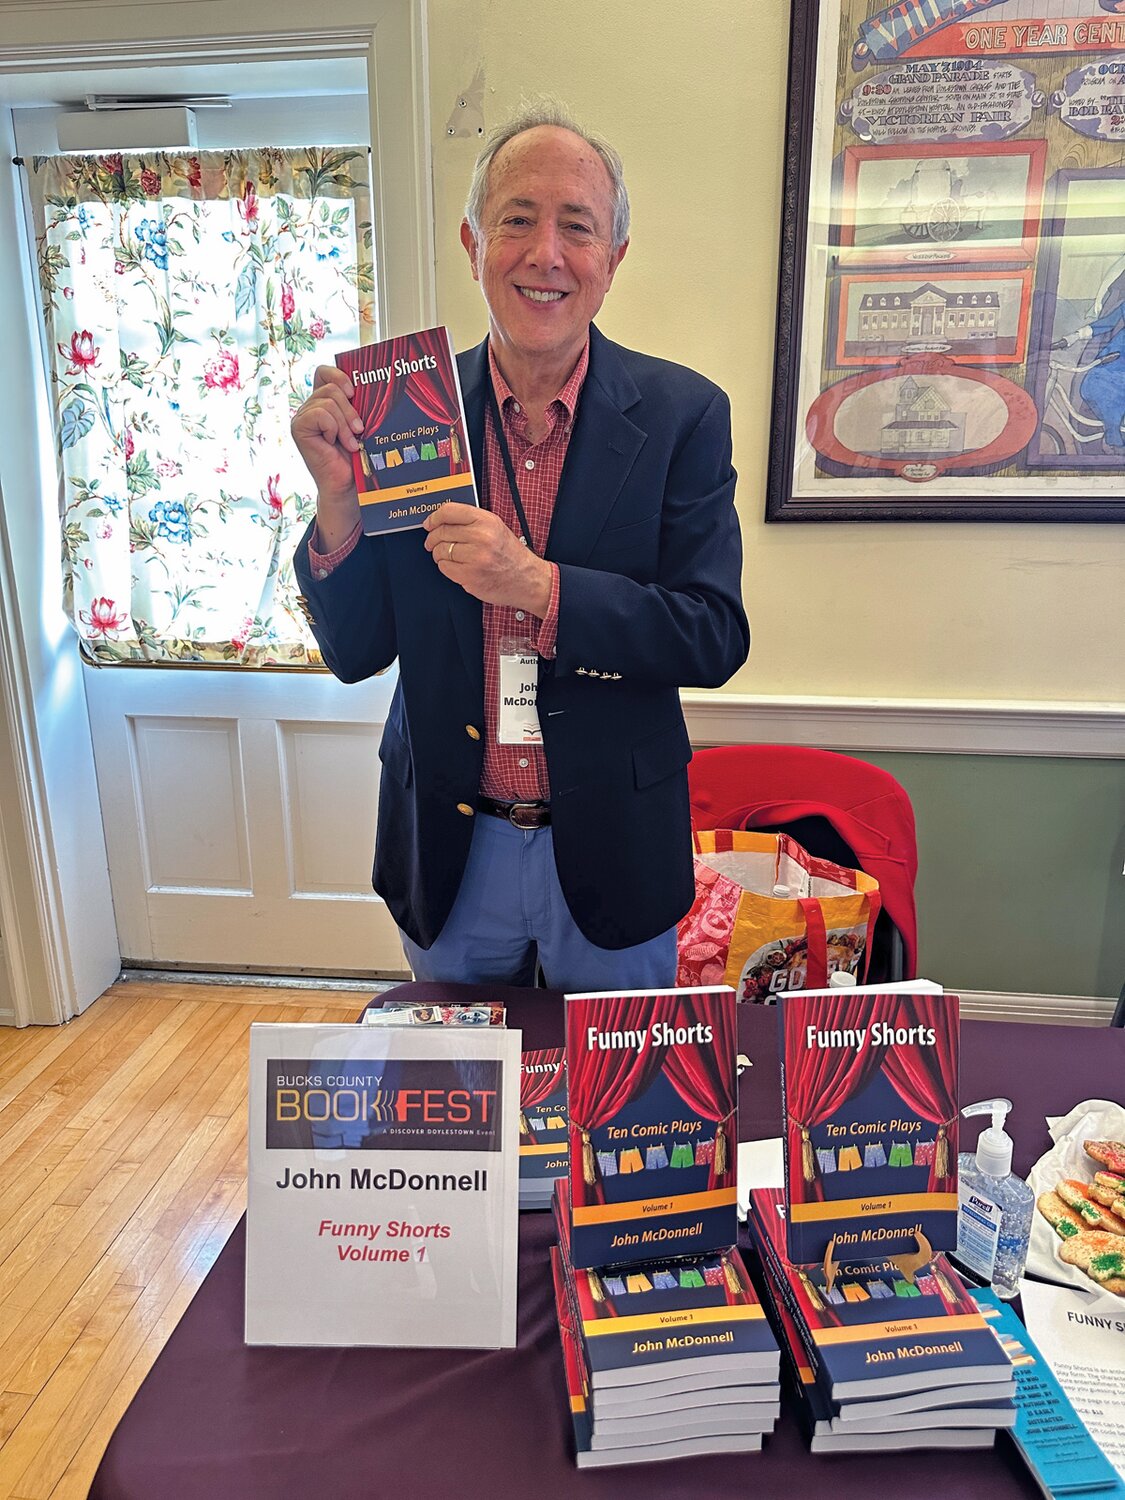 John McDonnell displays his book, “Funny Shorts,” at the Bucks County BookFest.